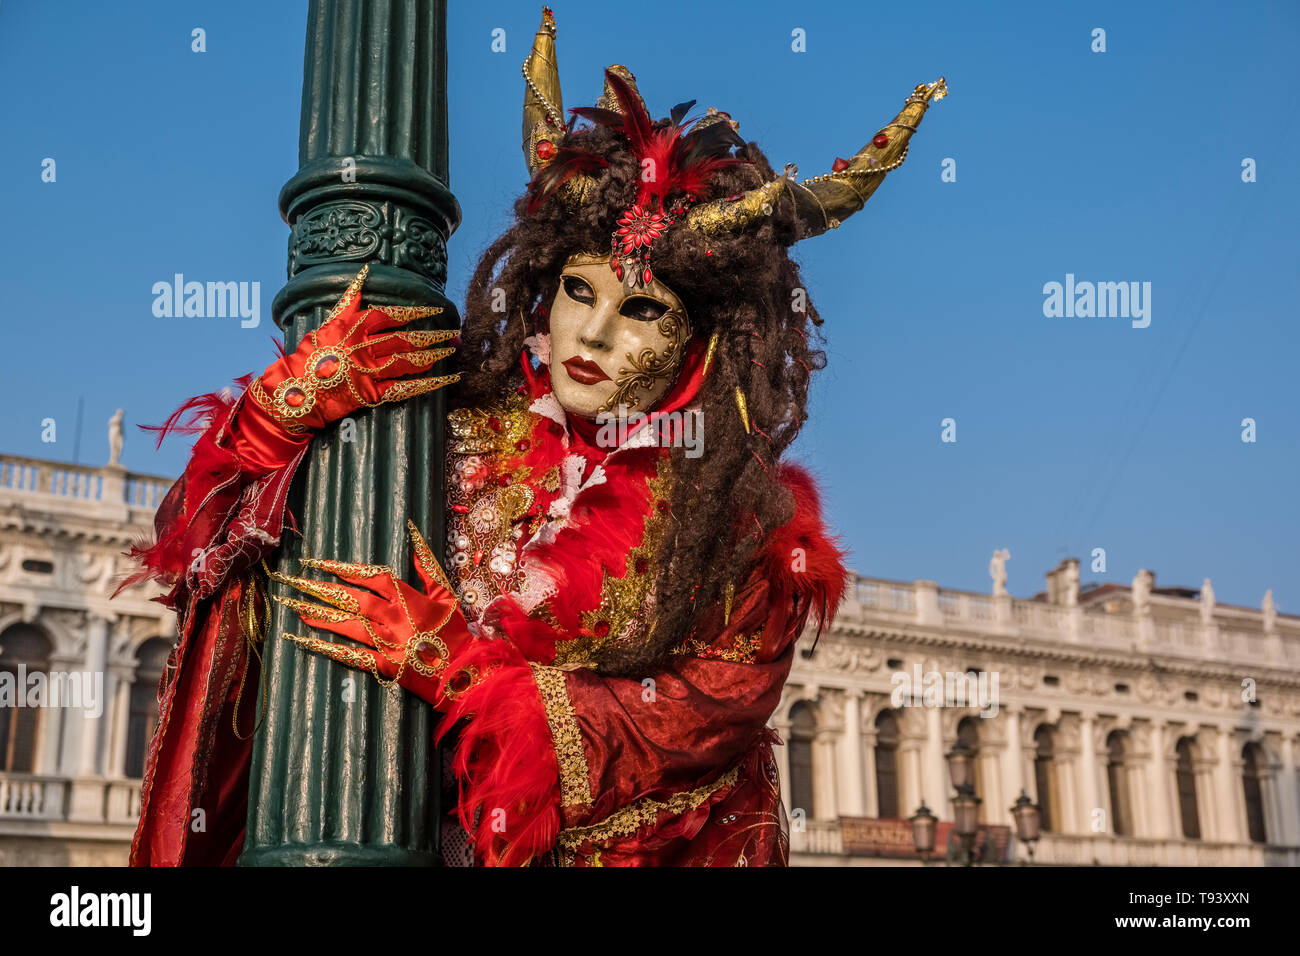 Portrait of a feminin masked person in a beautiful creative costume, posing in front of the Doge's Palace, Palazzo Ducale, celebrating the Venetian Ca Stock Photo